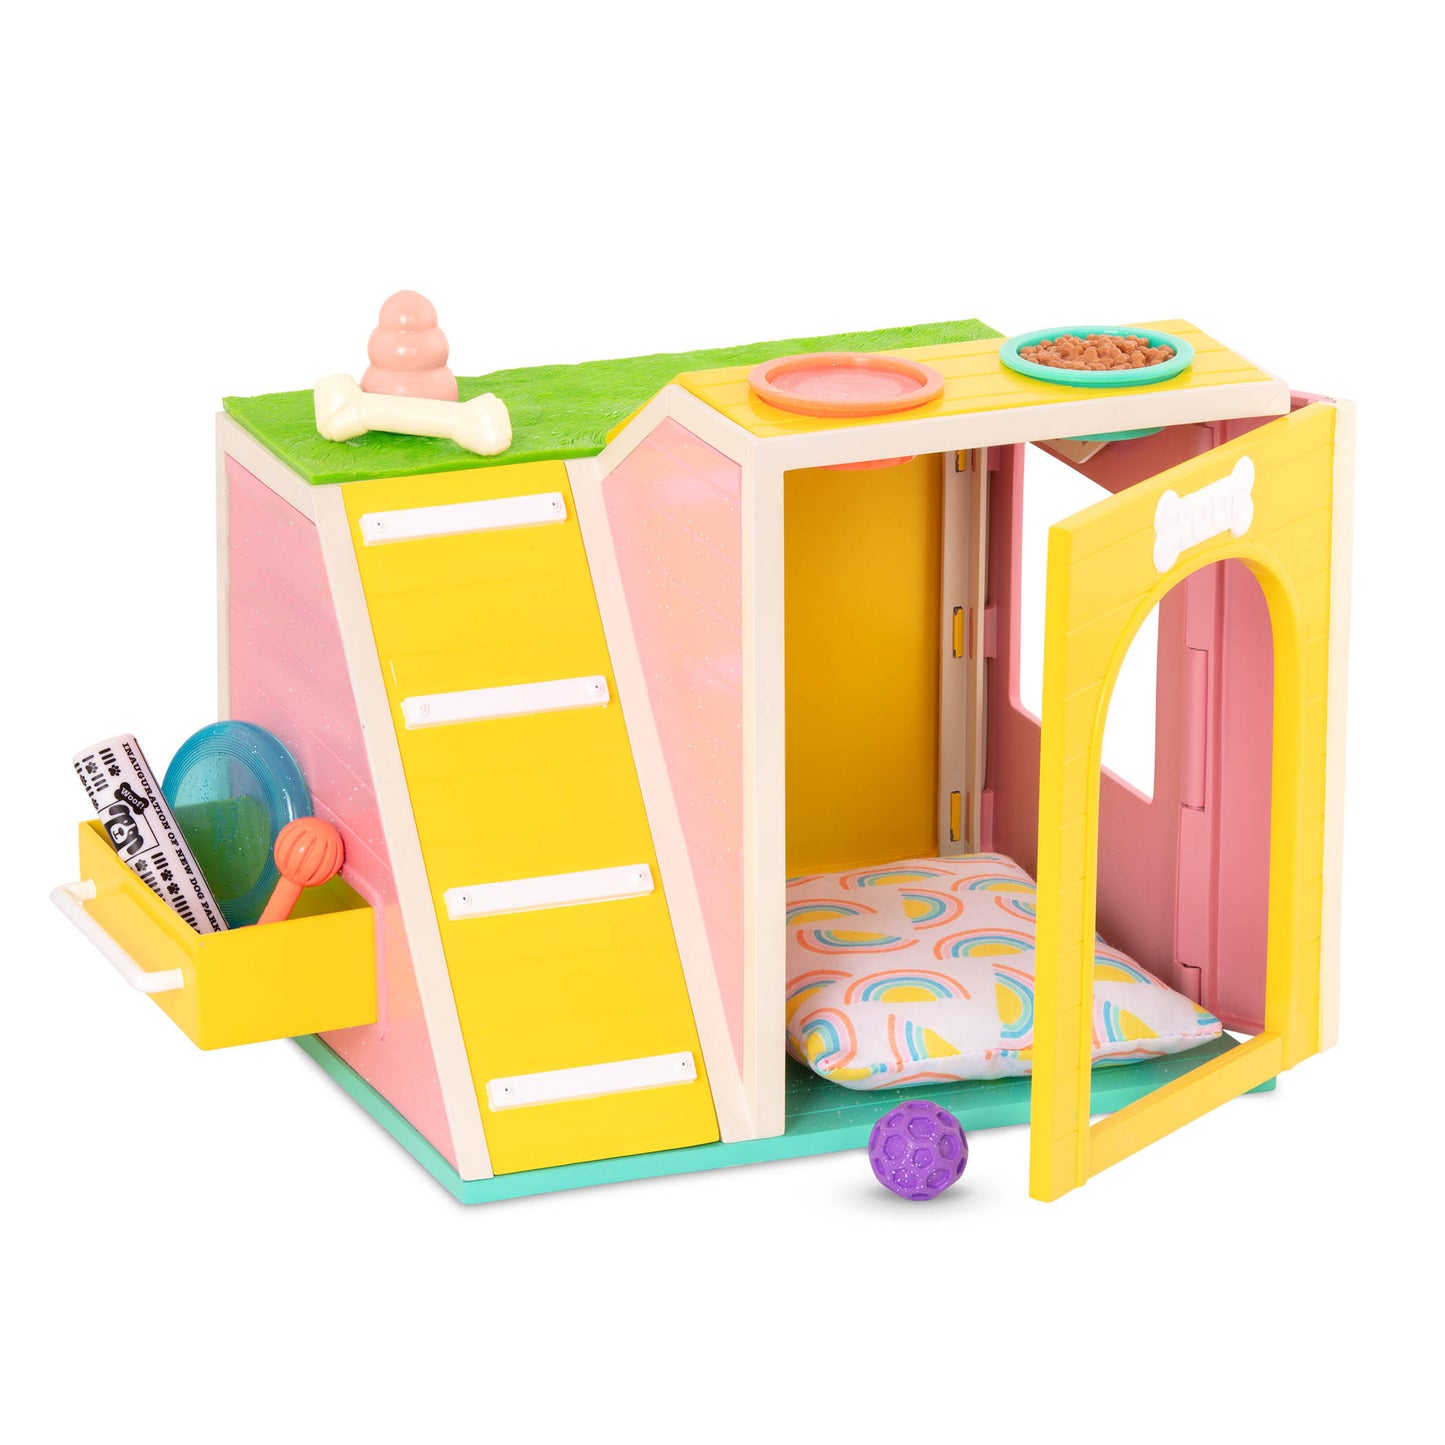 345055 - Dog House w/ Pup Playset